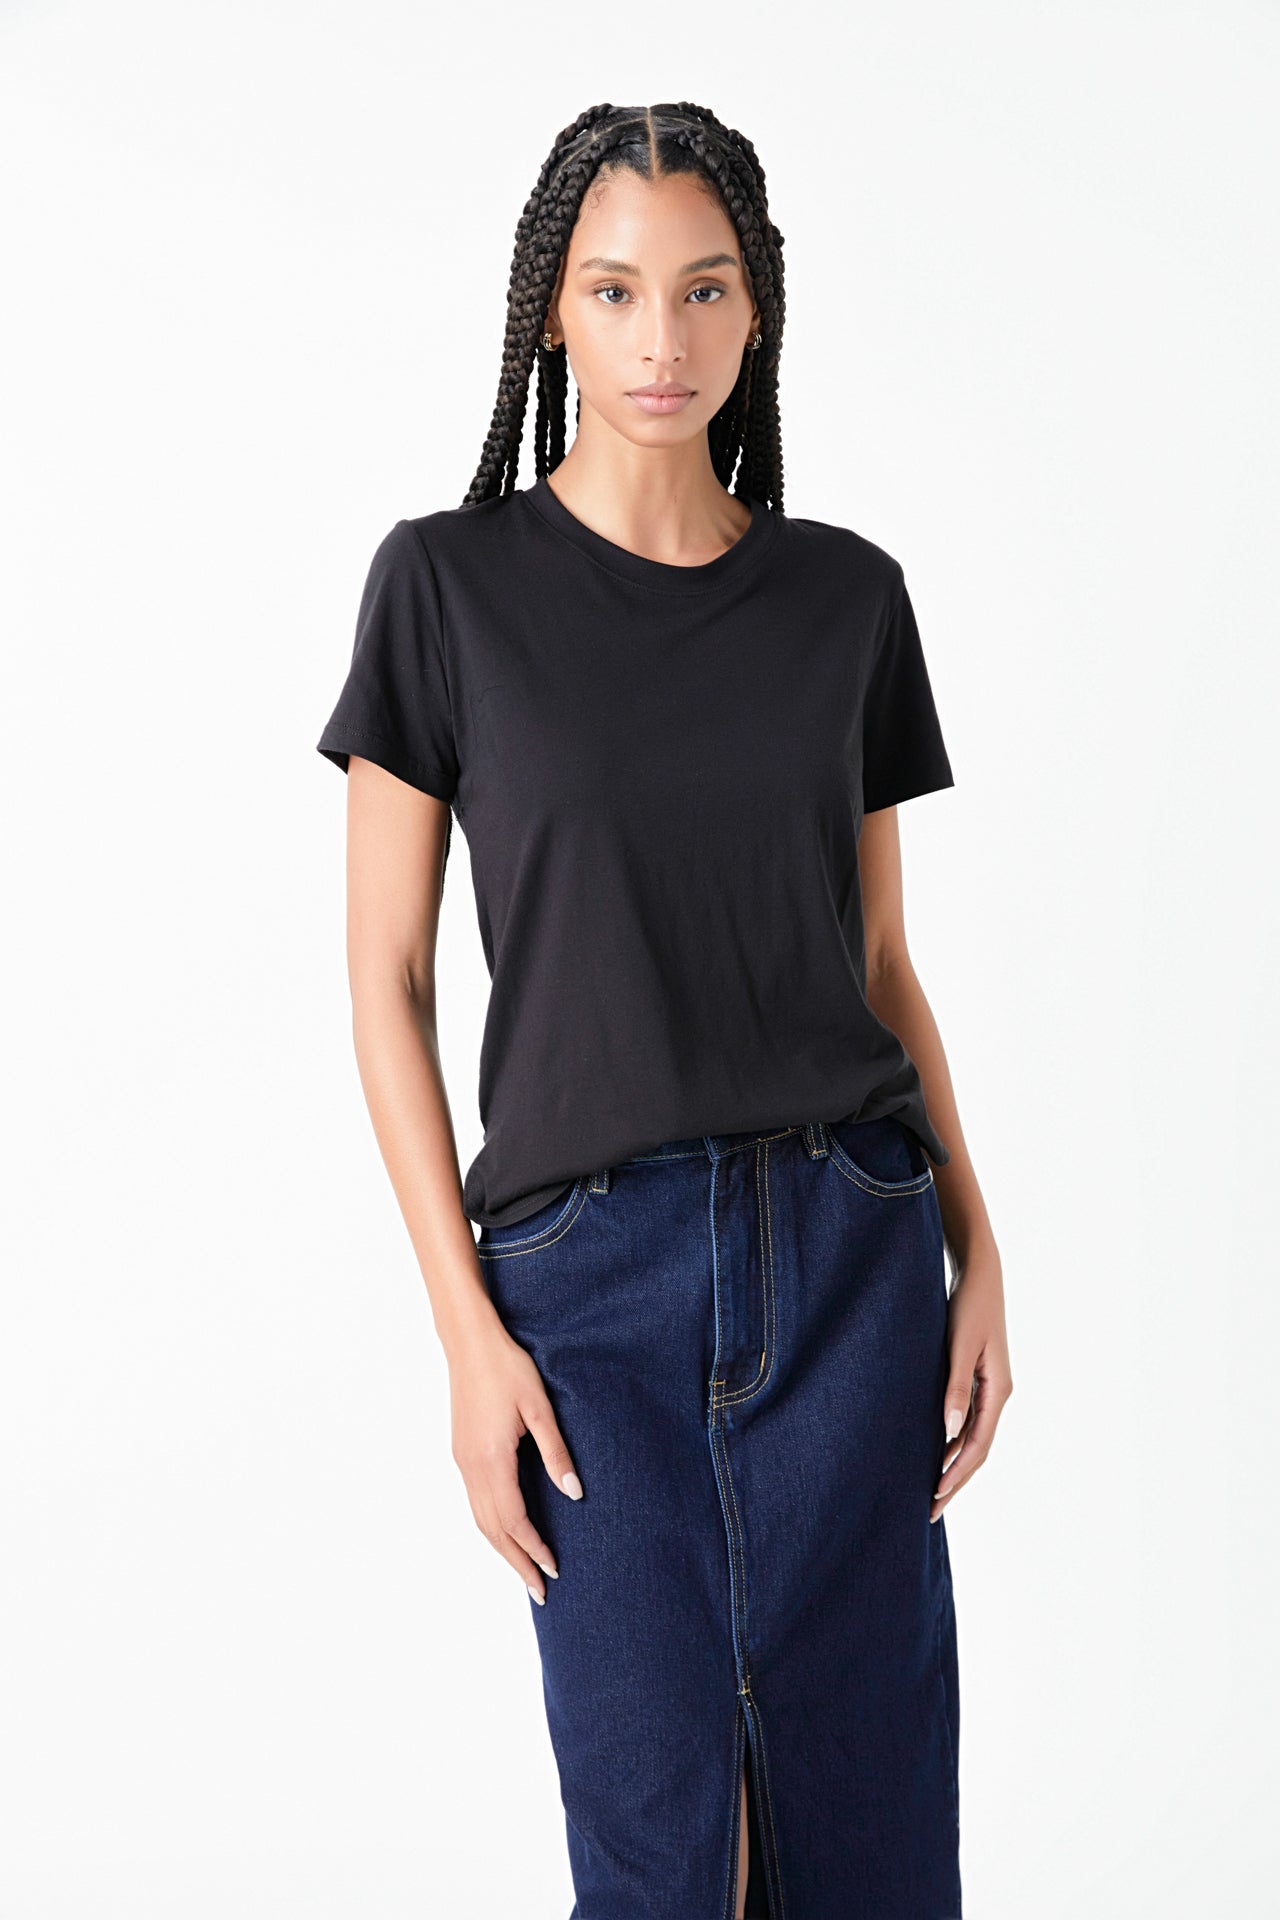 GREY LAB - Classic Round Neck T-shirt With Round Hem - TOPS available at Objectrare